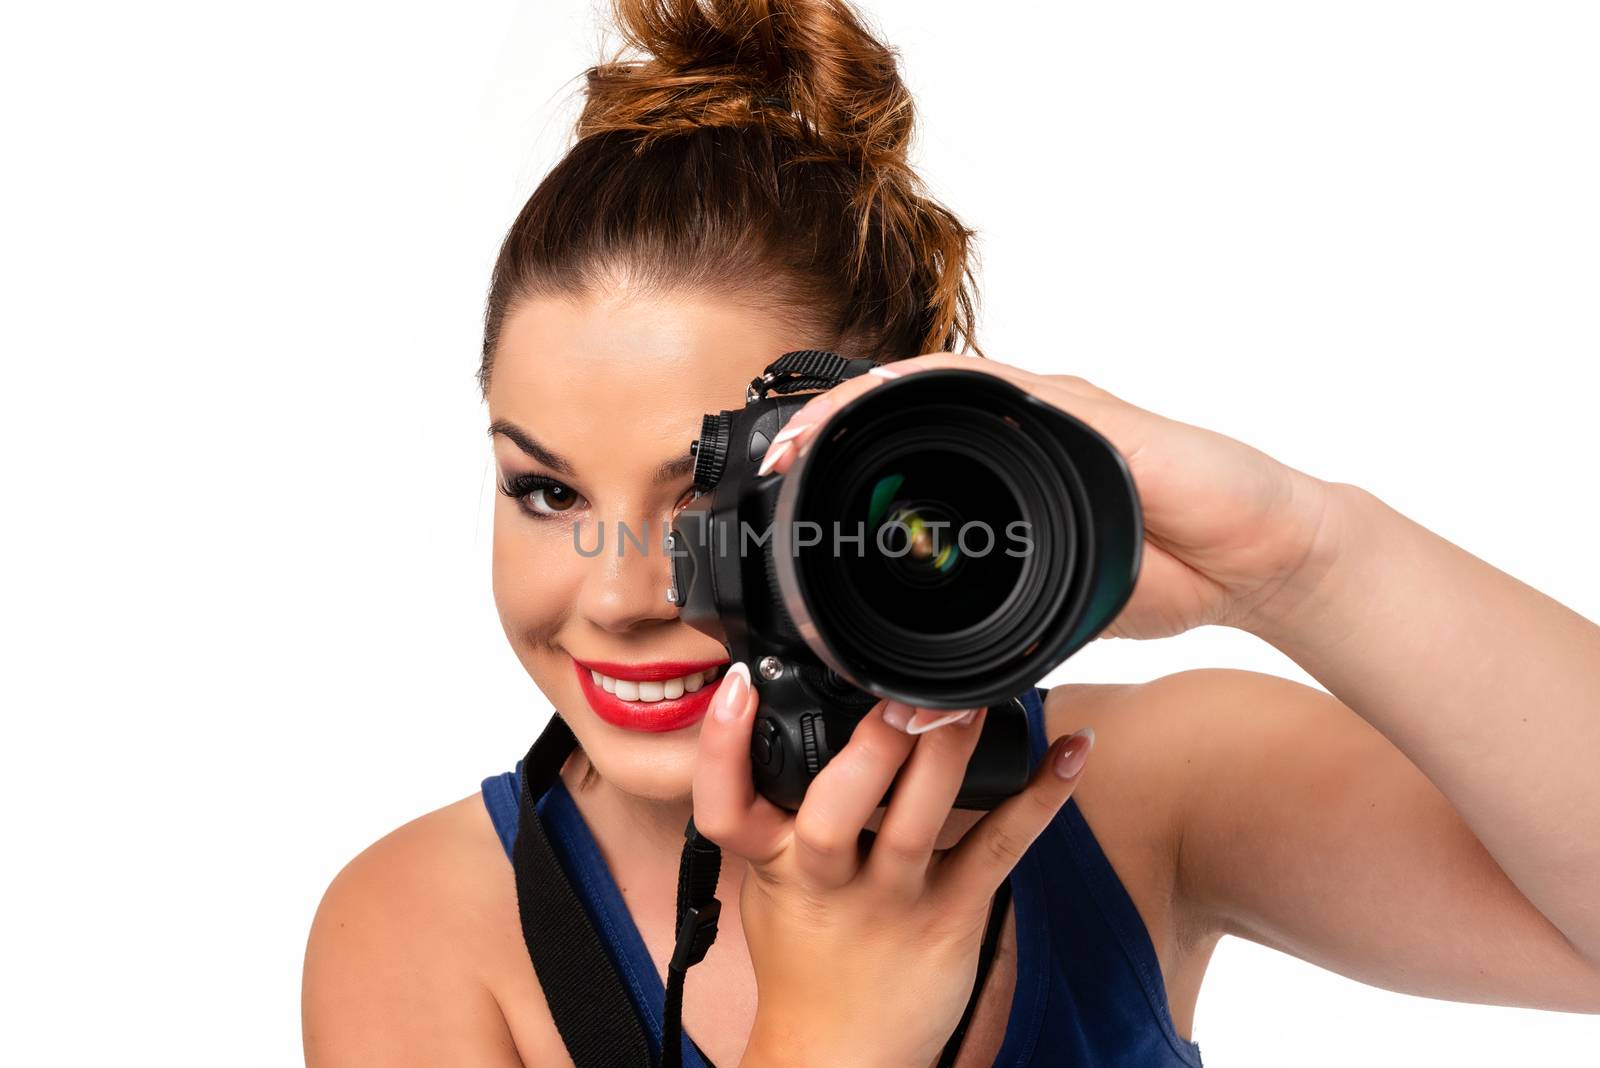 Photographer occupation concept - beautiful and attractive woman holding a professional DSLR camera and smiling